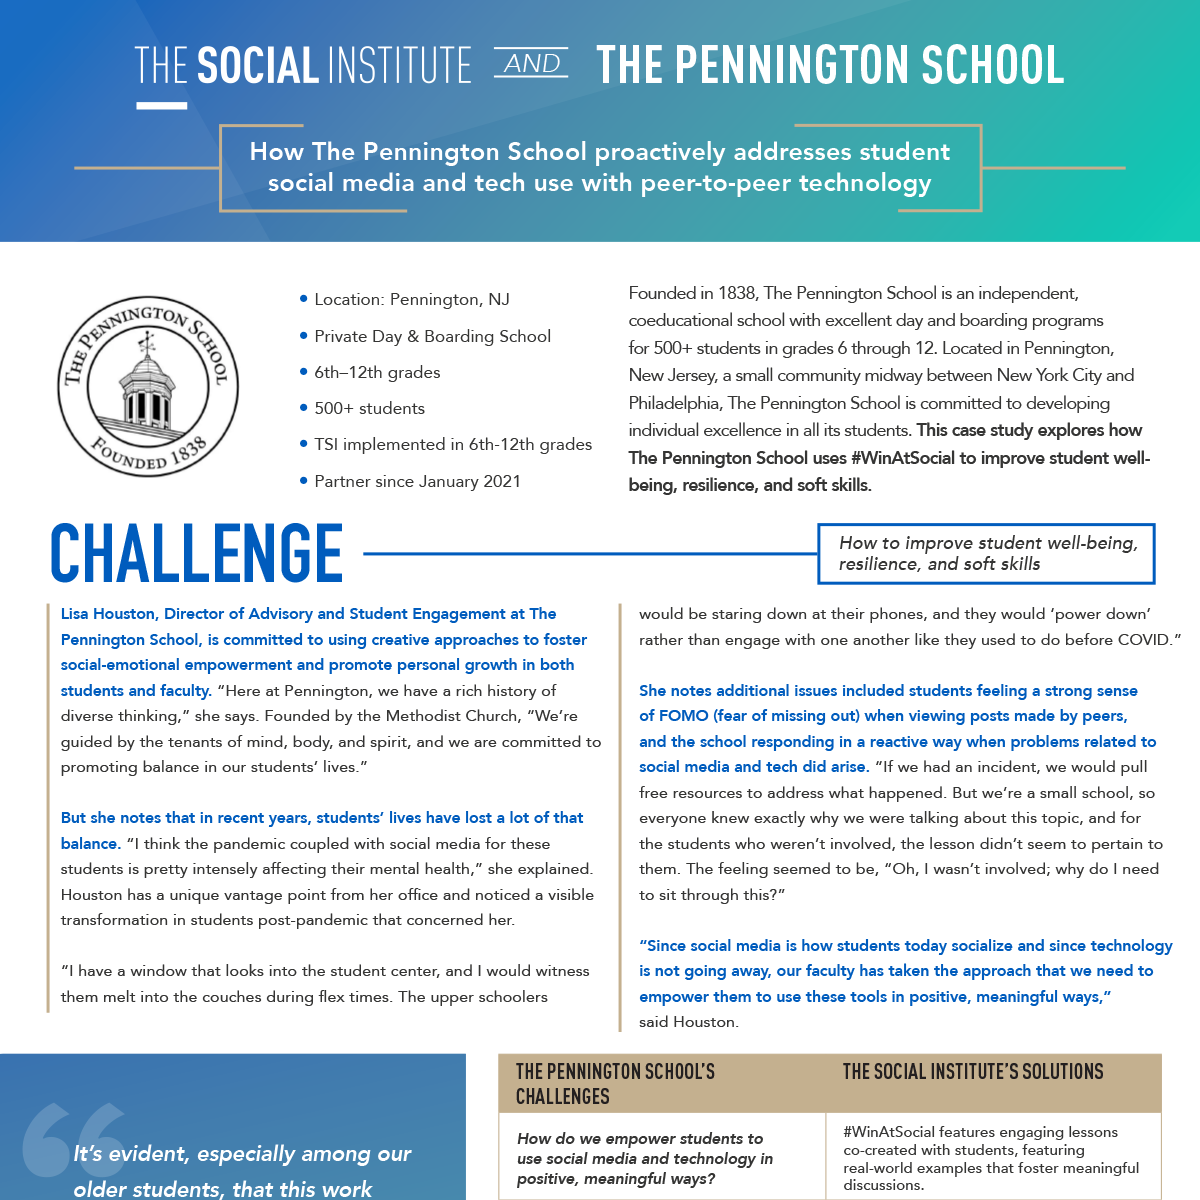 How The Pennington School proactively addresses student social media and tech use